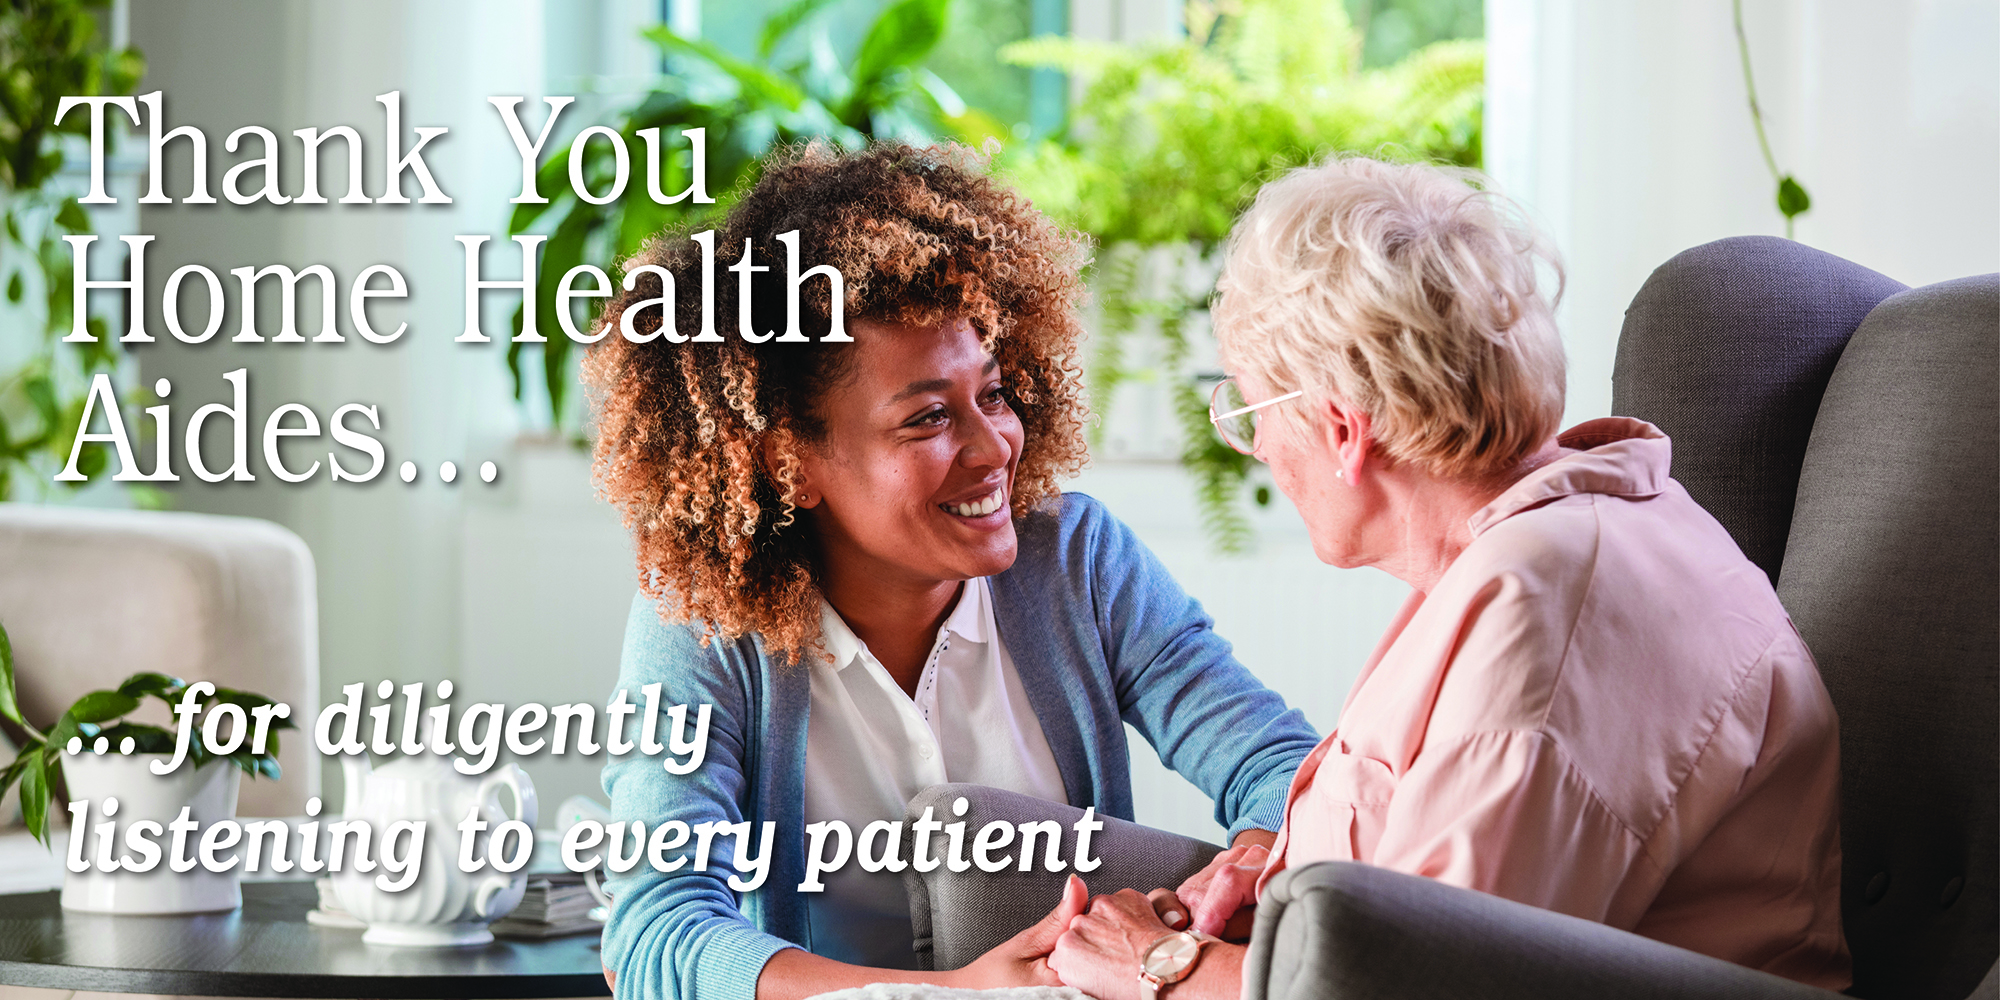 Thank you home health aides for diligently listening to every patient